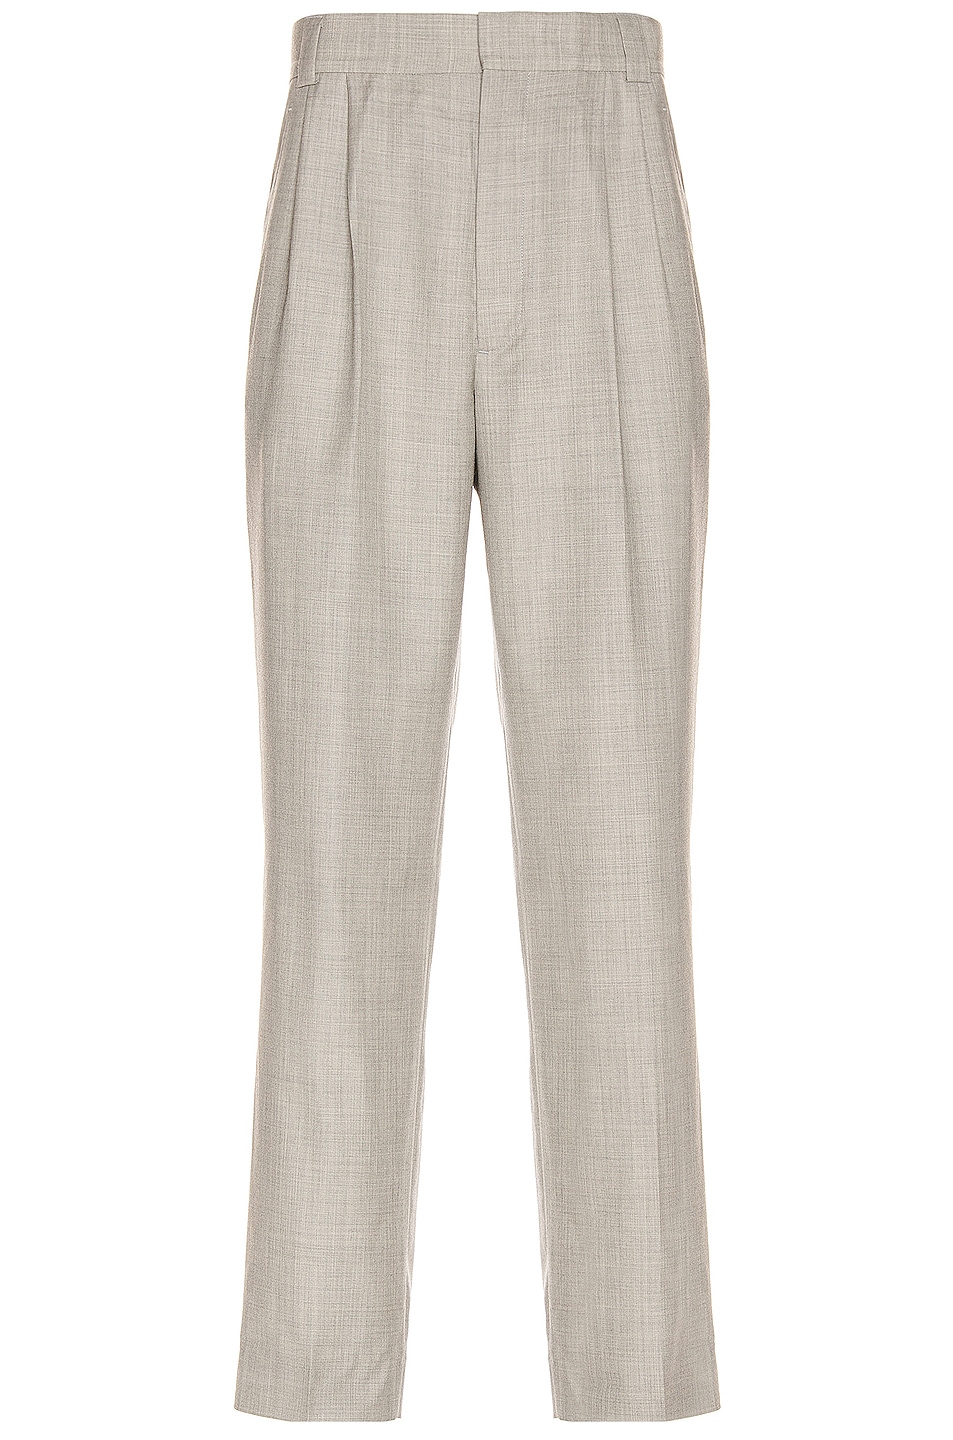 Image 1 of Fear of God Double Pleated Tapered Trouser in Light Heather Grey